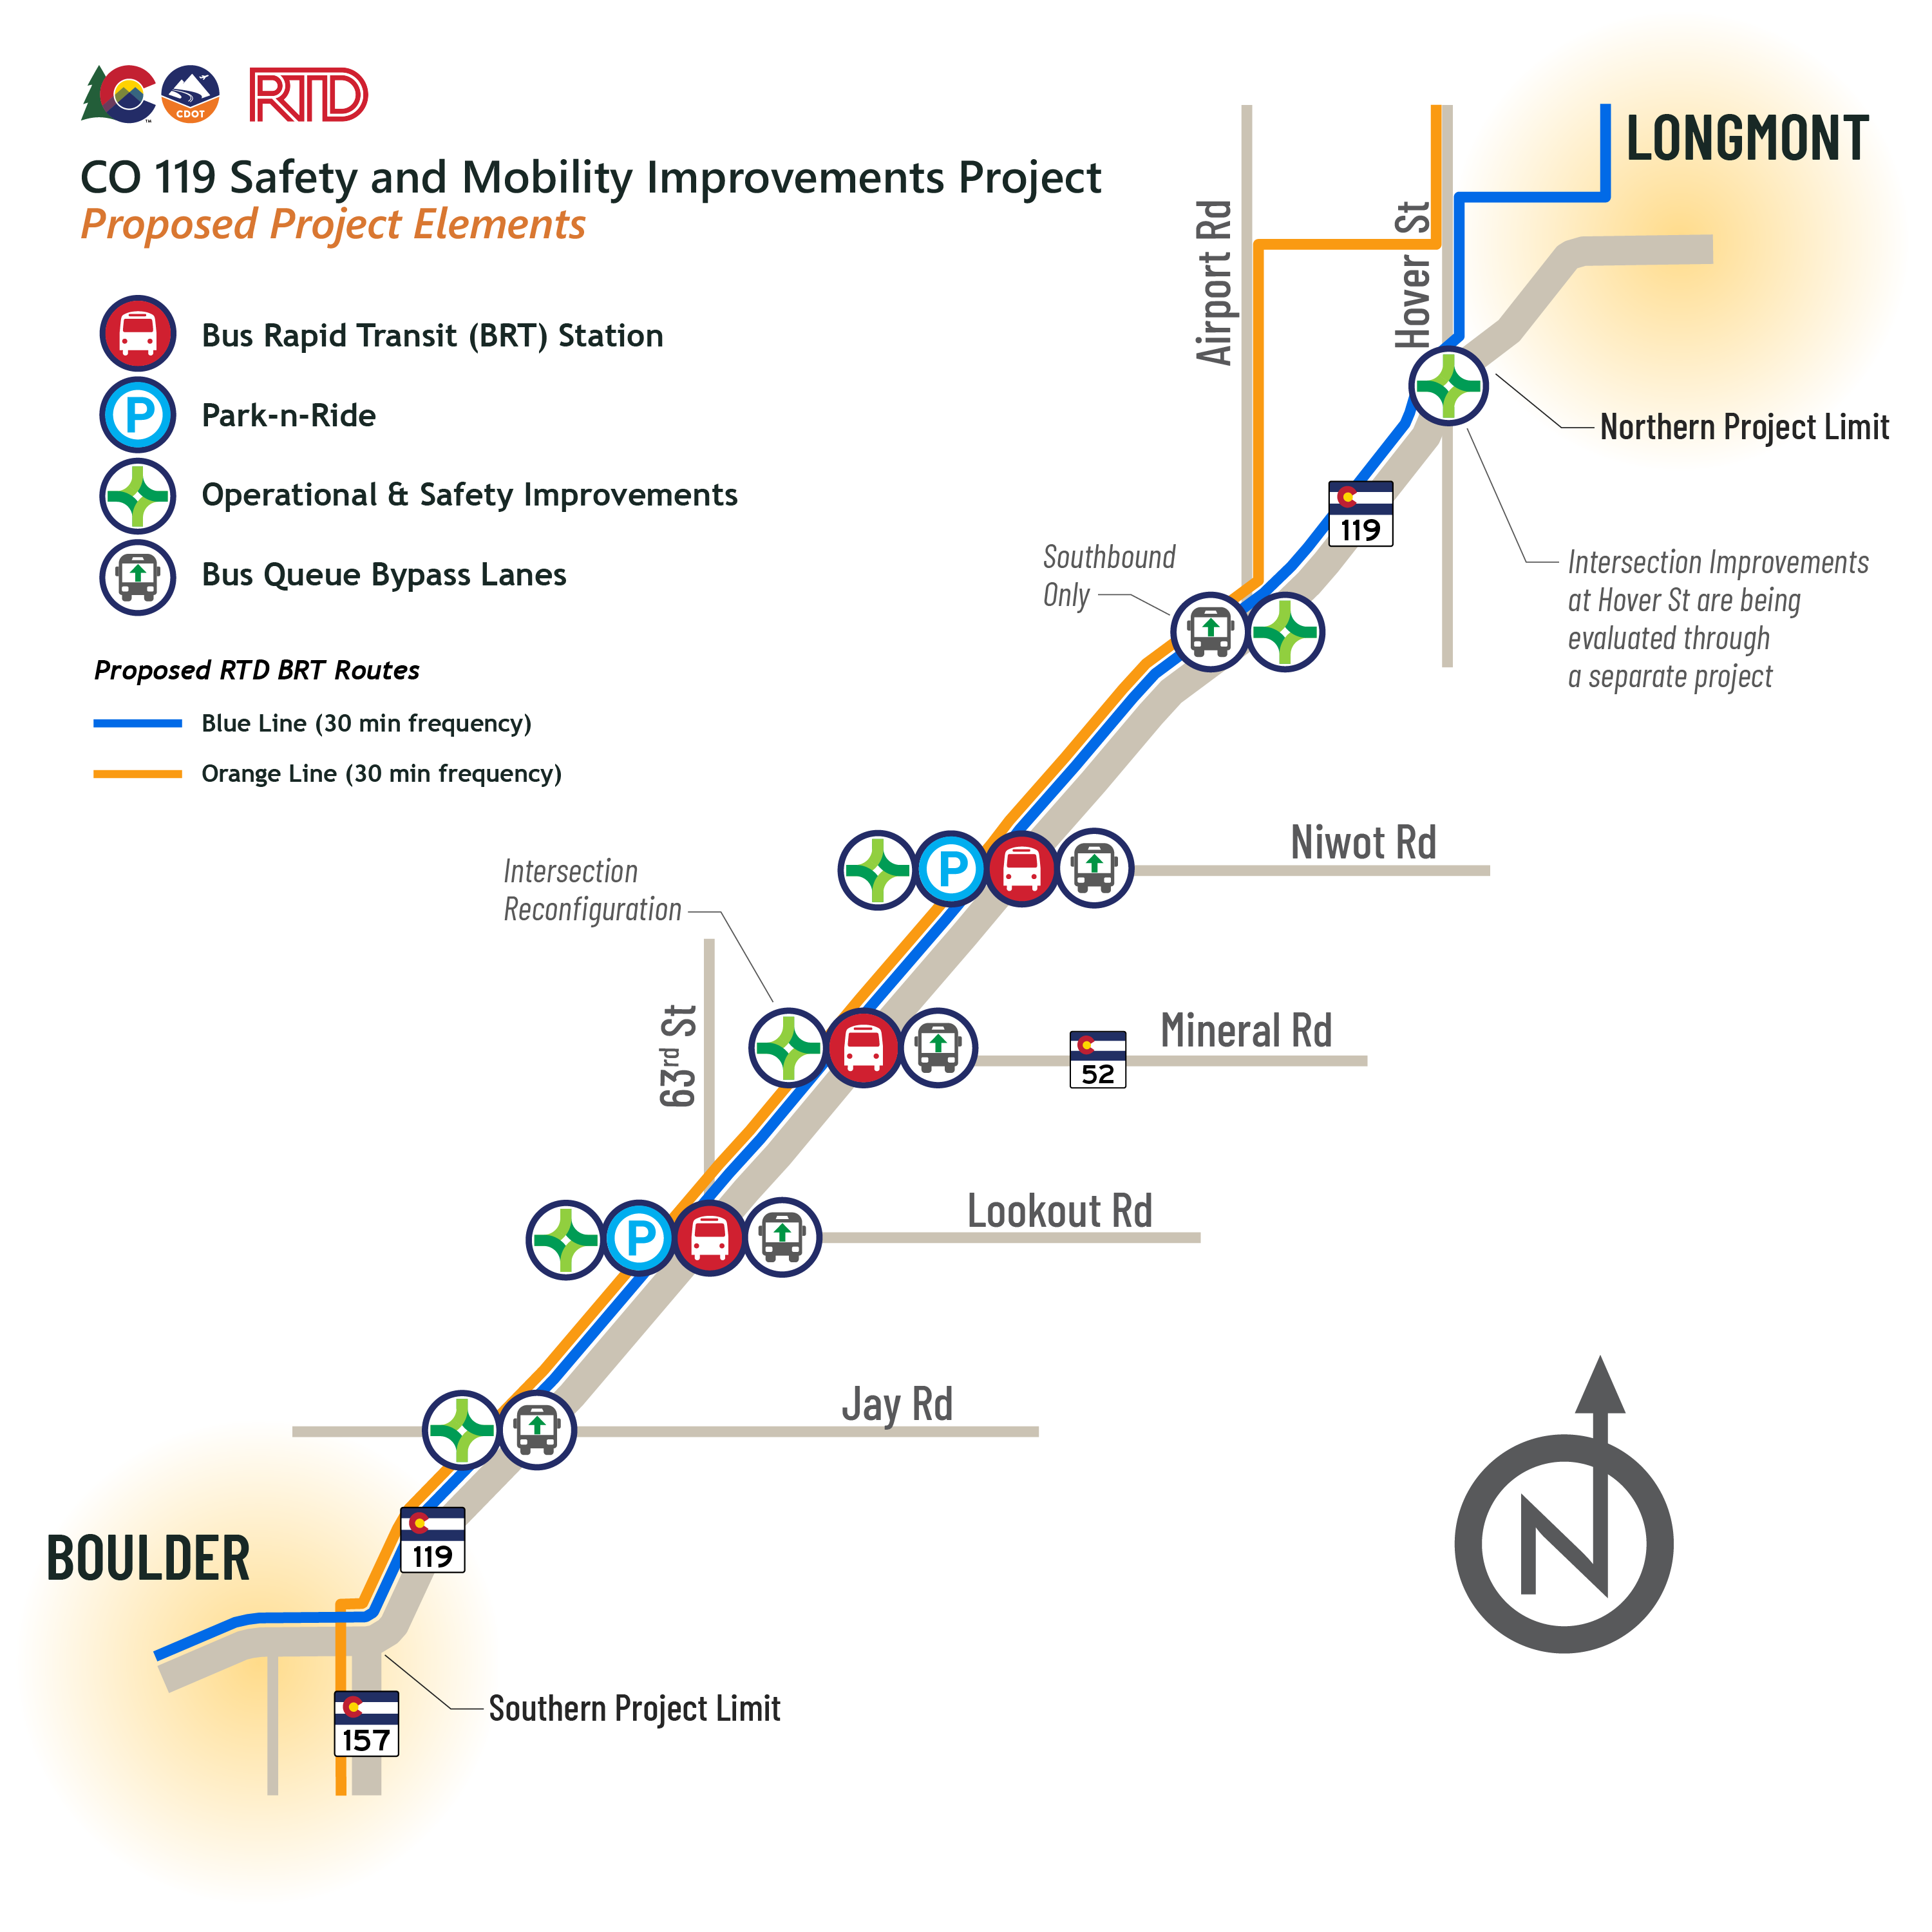 Alt text: Map showing project improvements at 5 signalized intersections between Boulder and Longmont on CO 119 